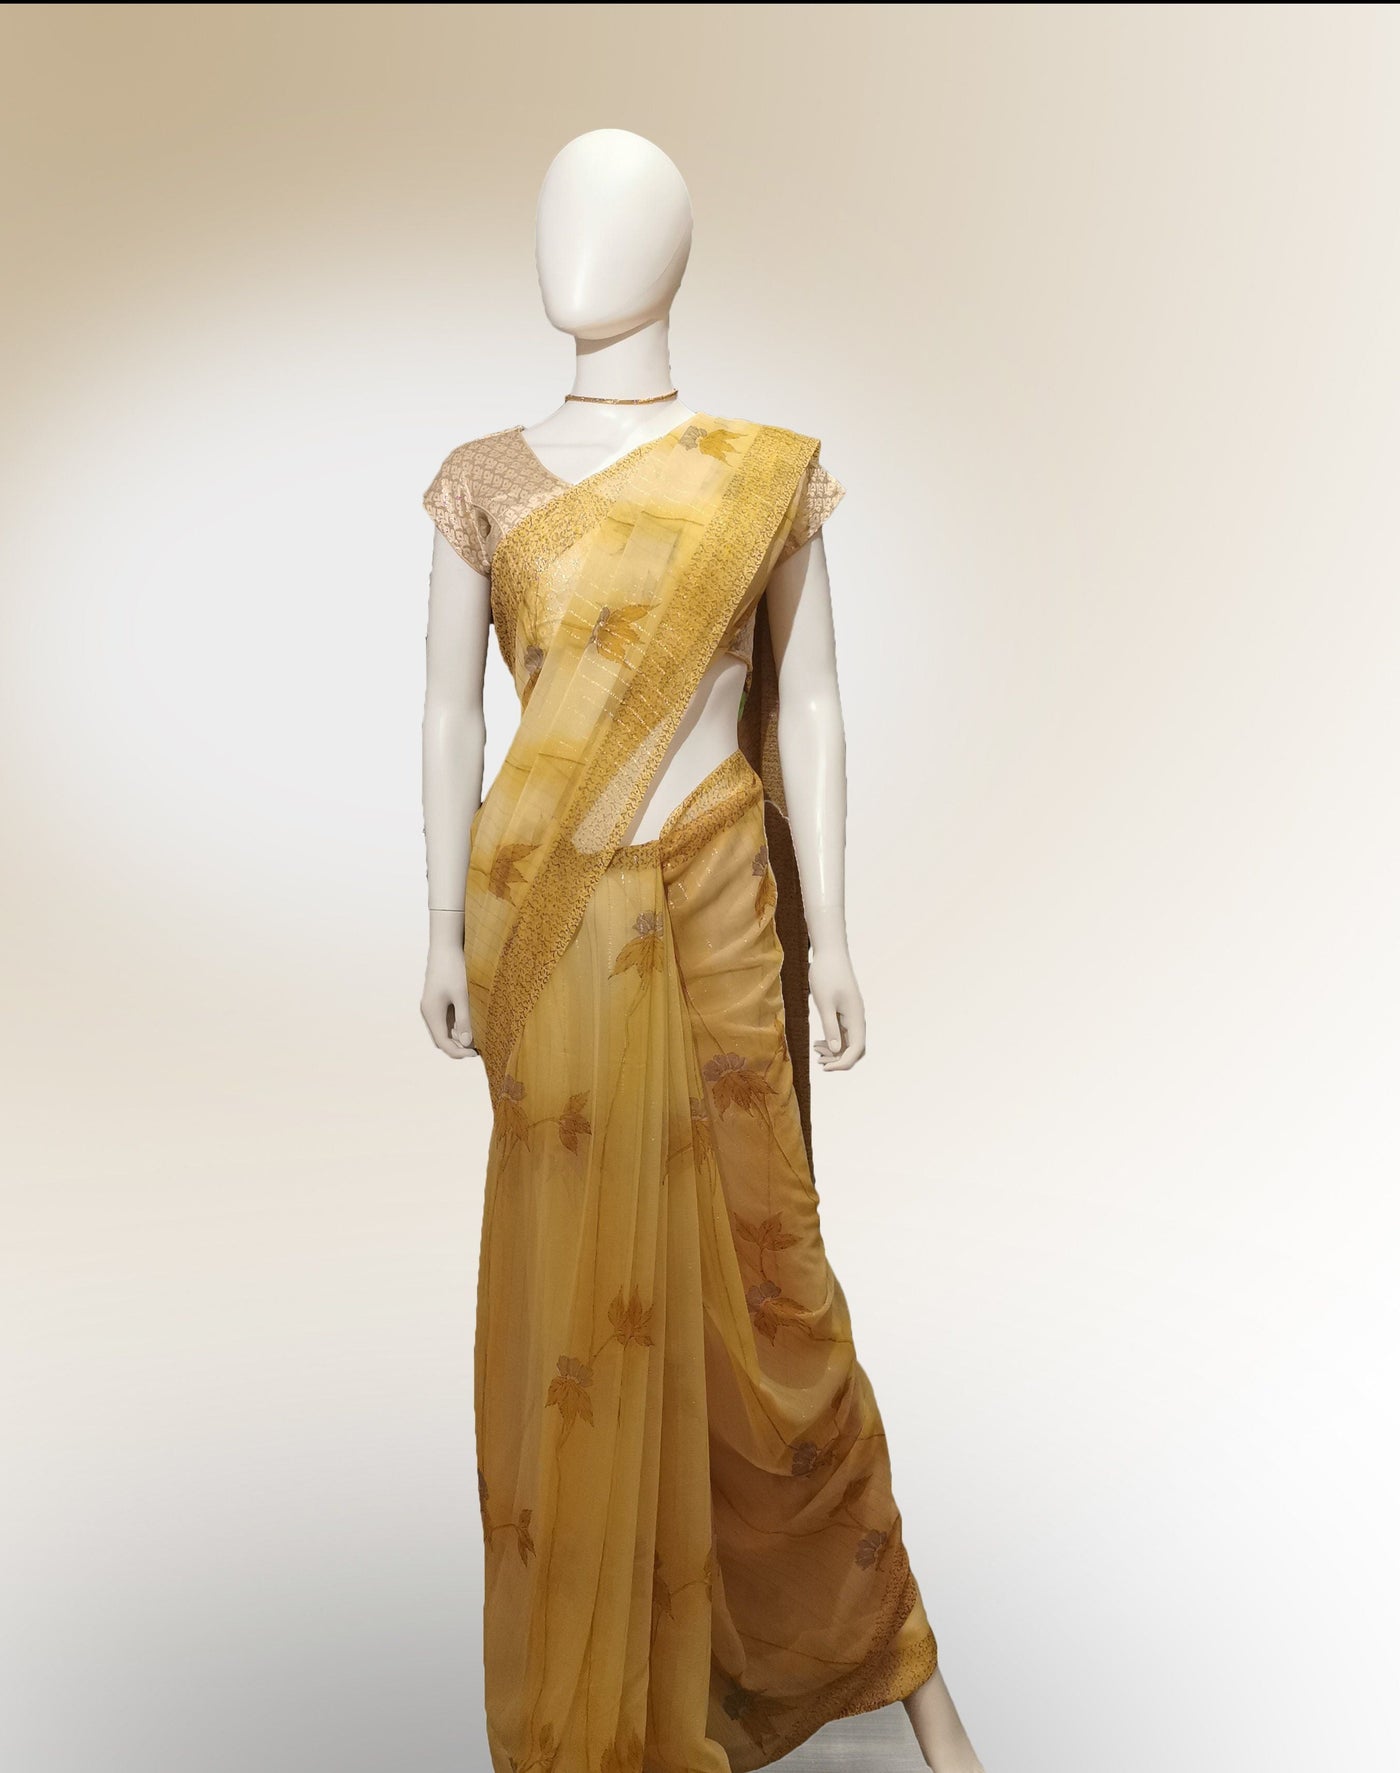 Saree in Golden Yellow with Brushed Floral Print Indian Clothing in Denver, CO, Aurora, CO, Boulder, CO, Fort Collins, CO, Colorado Springs, CO, Parker, CO, Highlands Ranch, CO, Cherry Creek, CO, Centennial, CO, and Longmont, CO. NATIONWIDE SHIPPING USA- India Fashion X